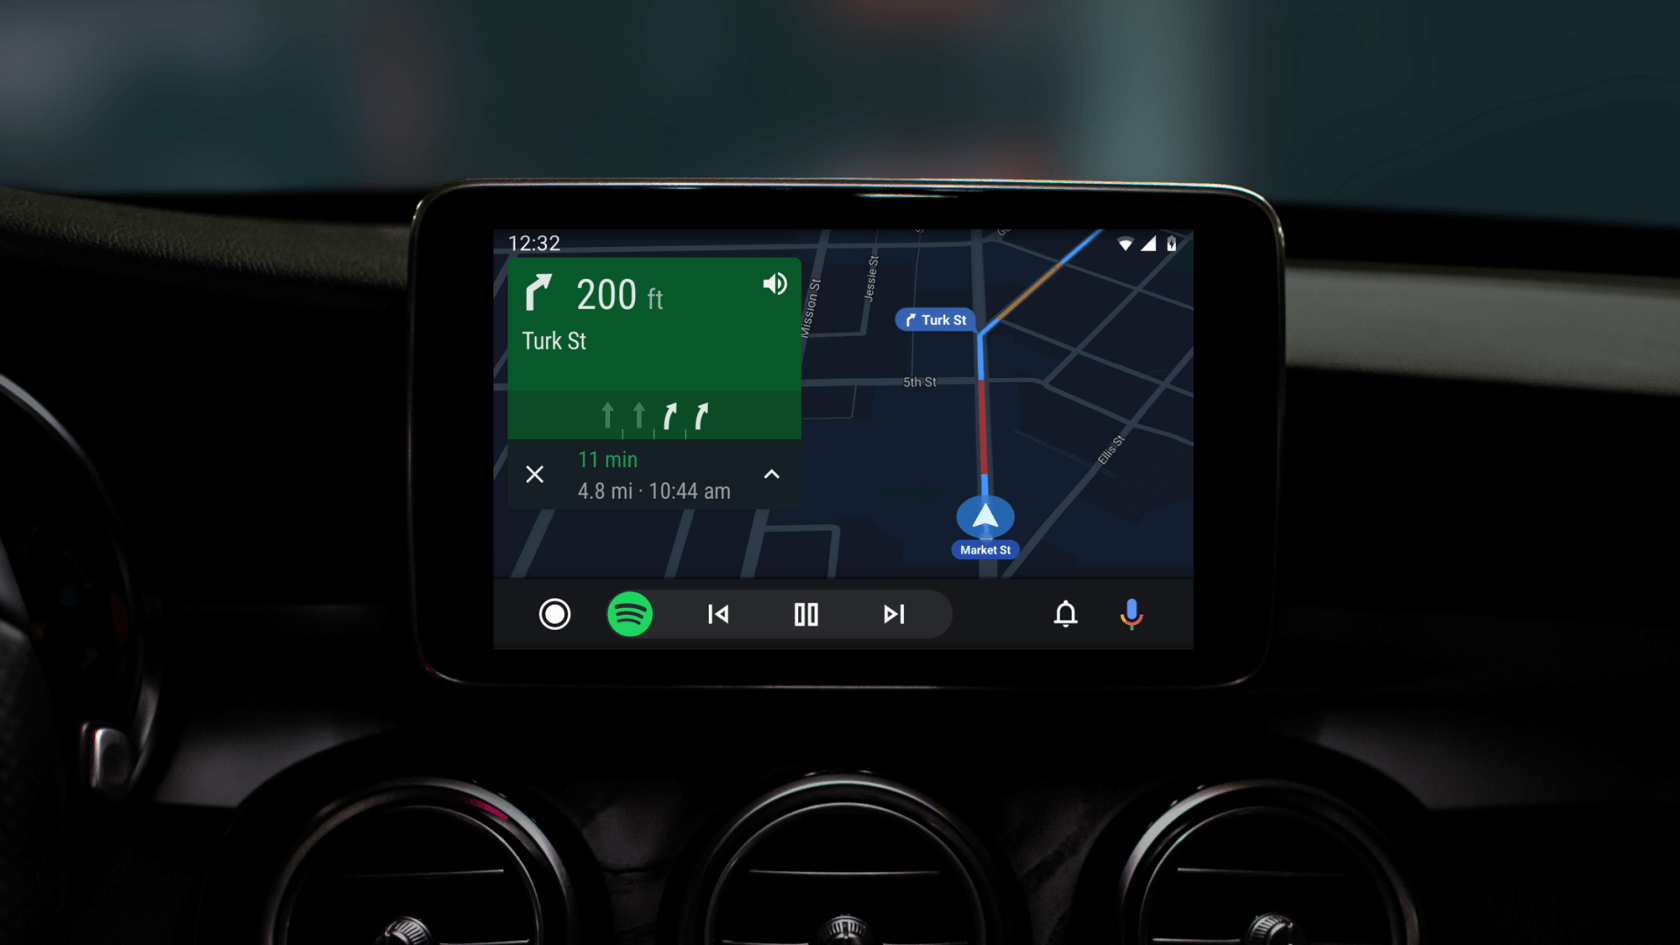 Android Auto is getting a streamlined interface, dark mode, and improved features this summer